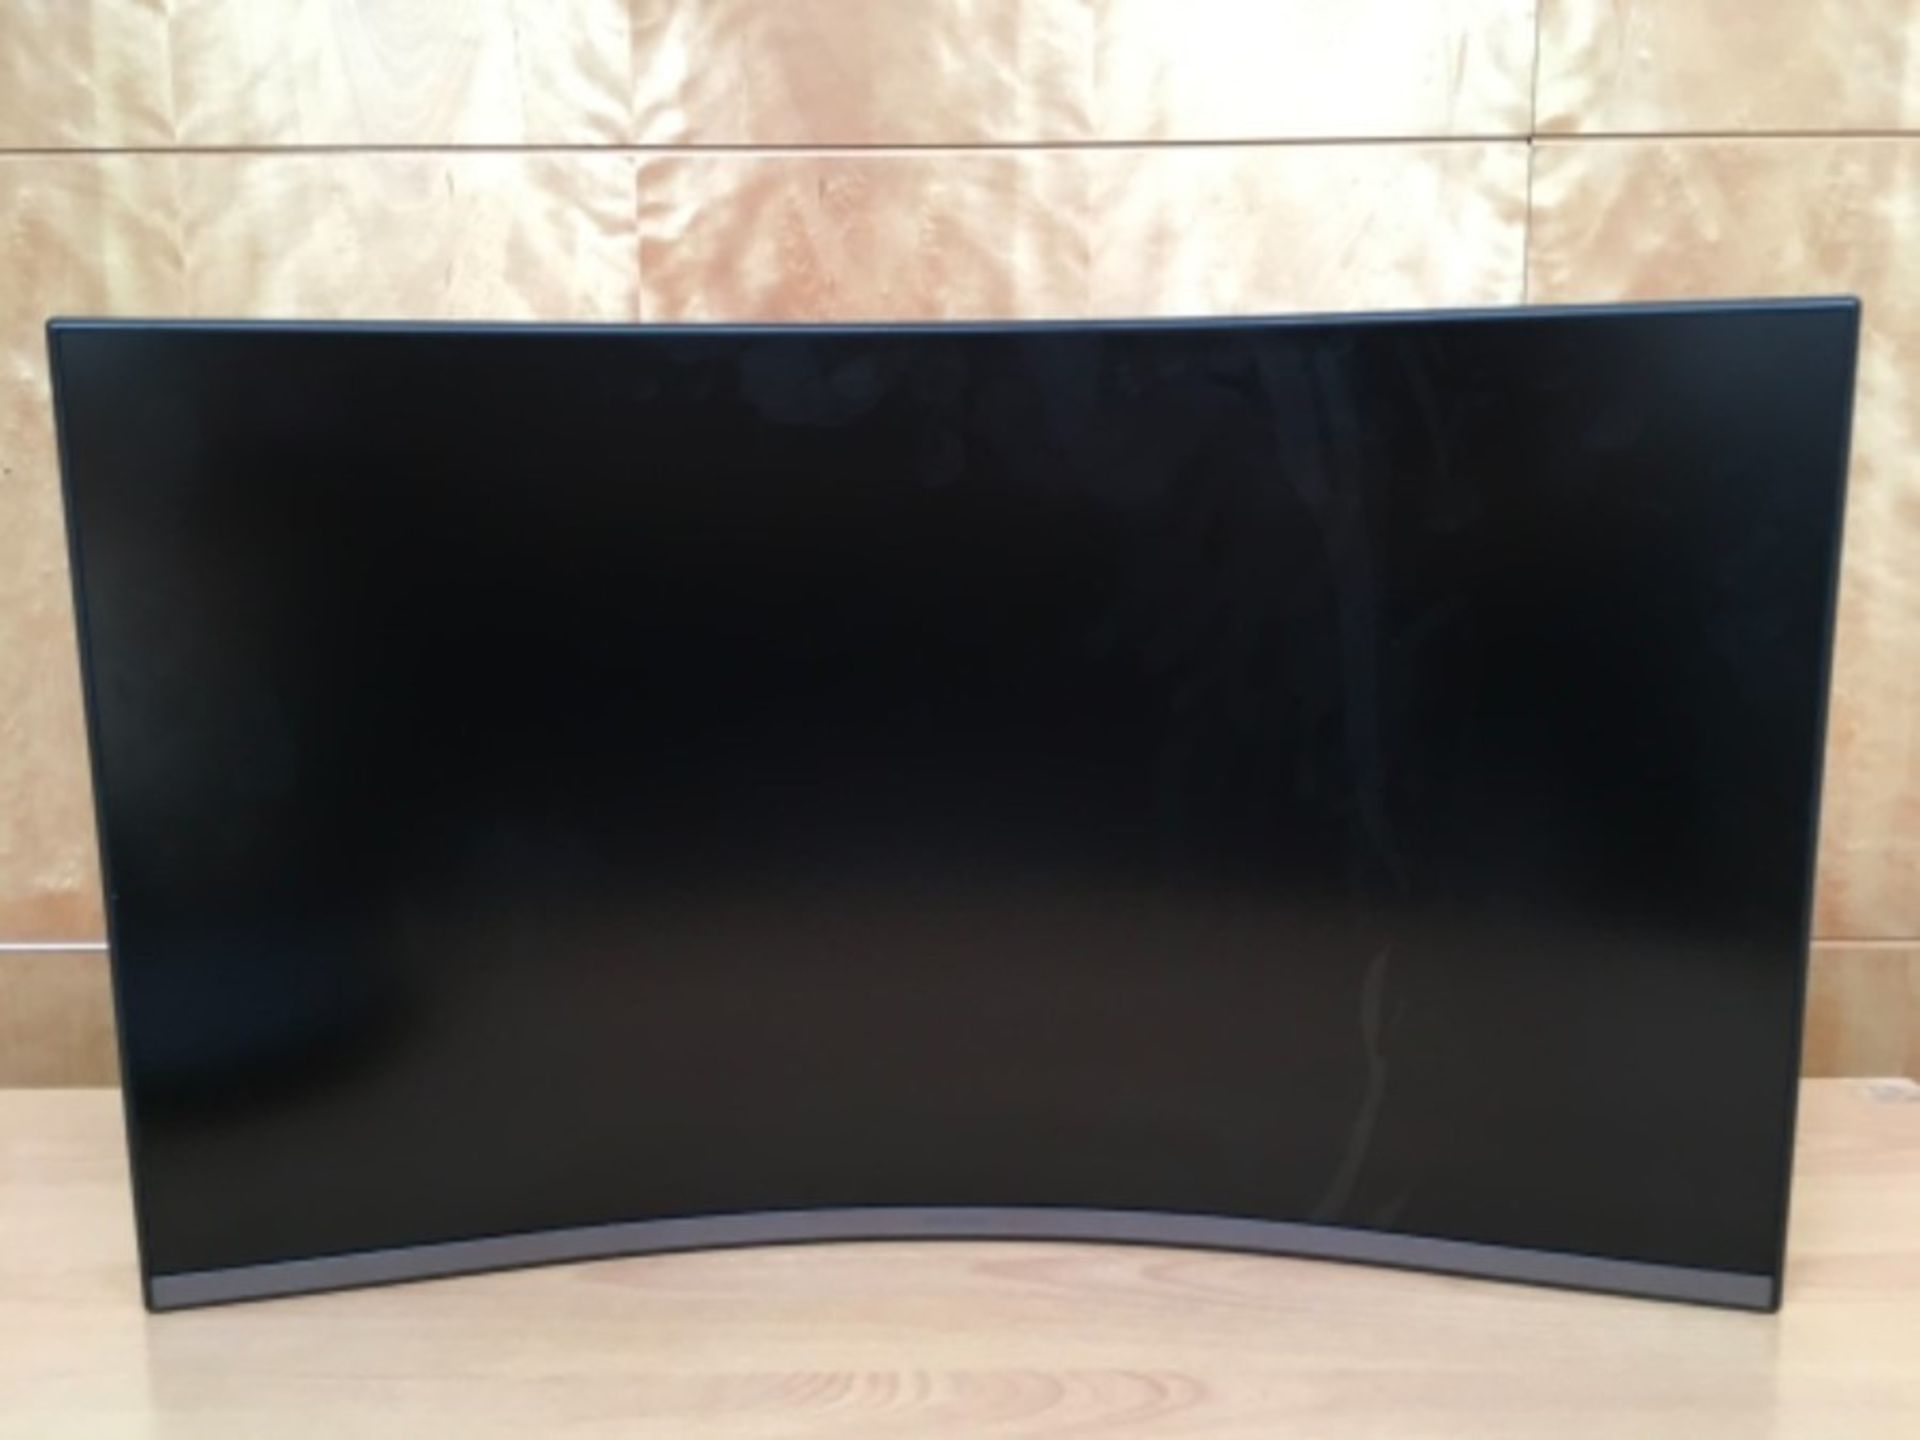 (BROKEN SCREEN) RRP £237.00 Samsung T55 Curved Monitor, 32 Inch, 1000R, 75hz - Image 2 of 3